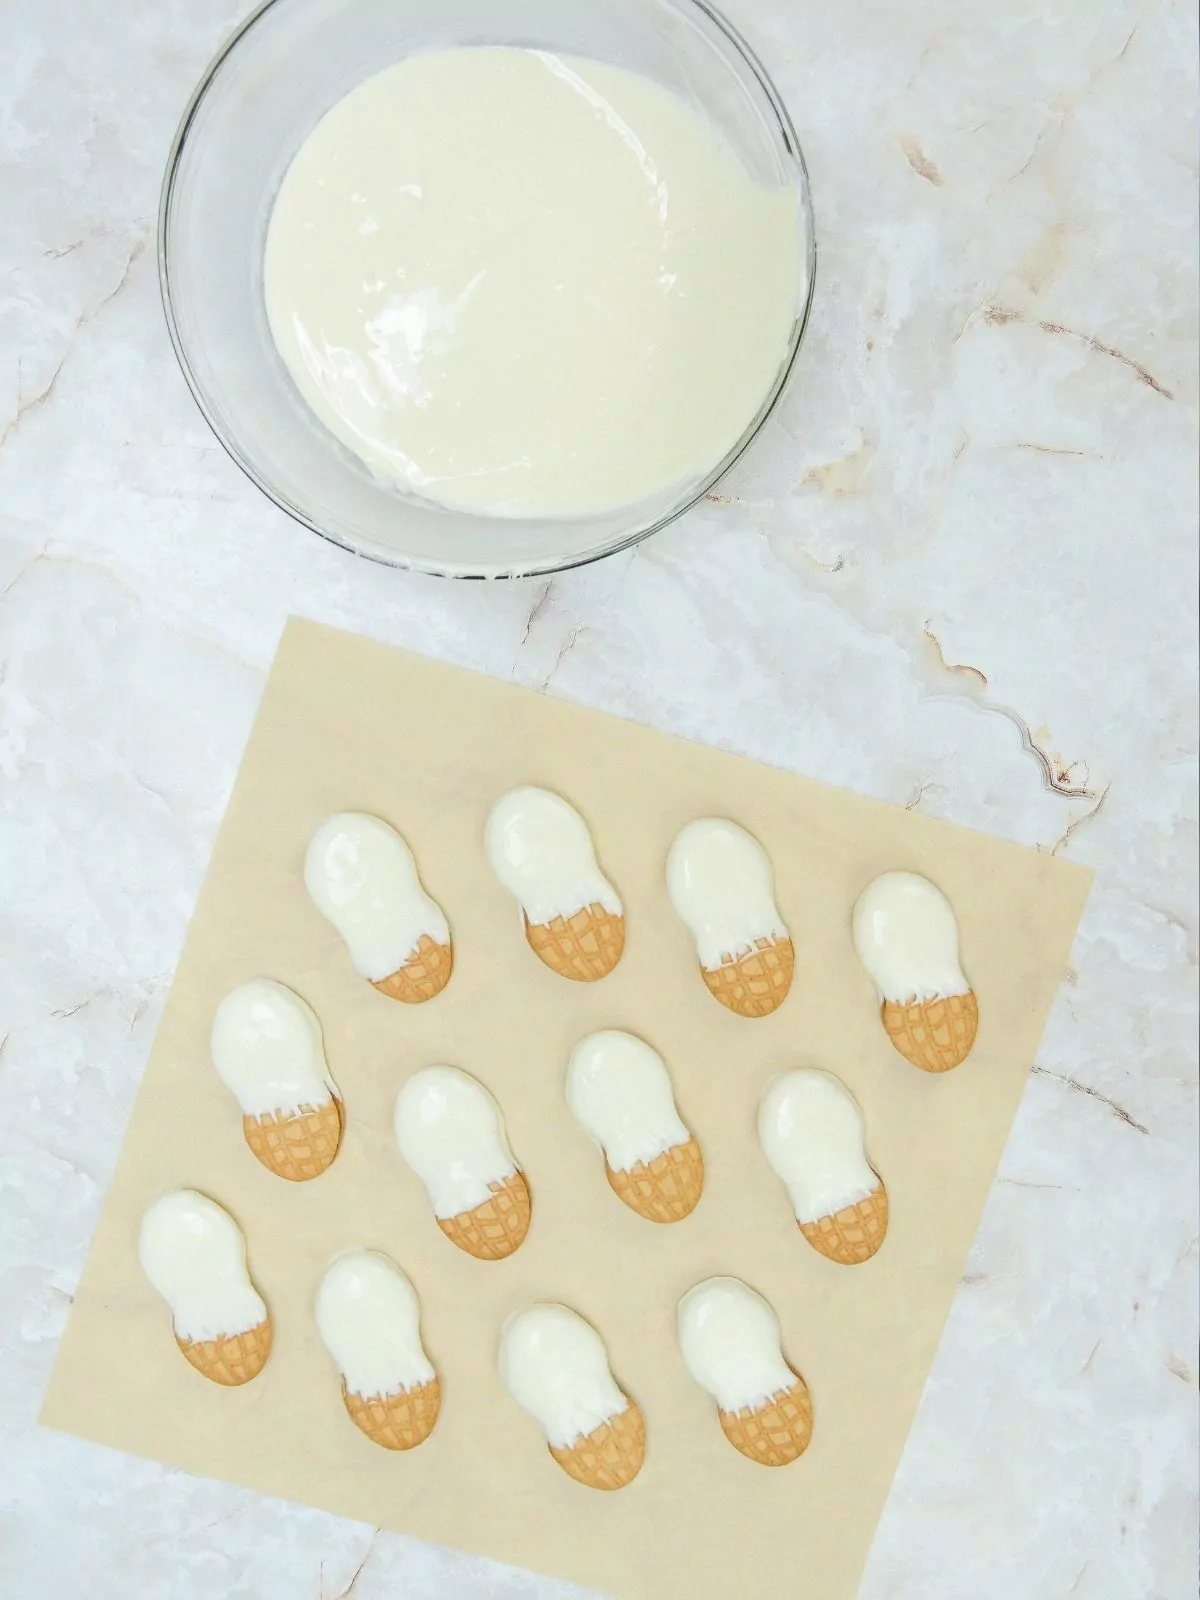 Dipped cookies in melted white chocolate.